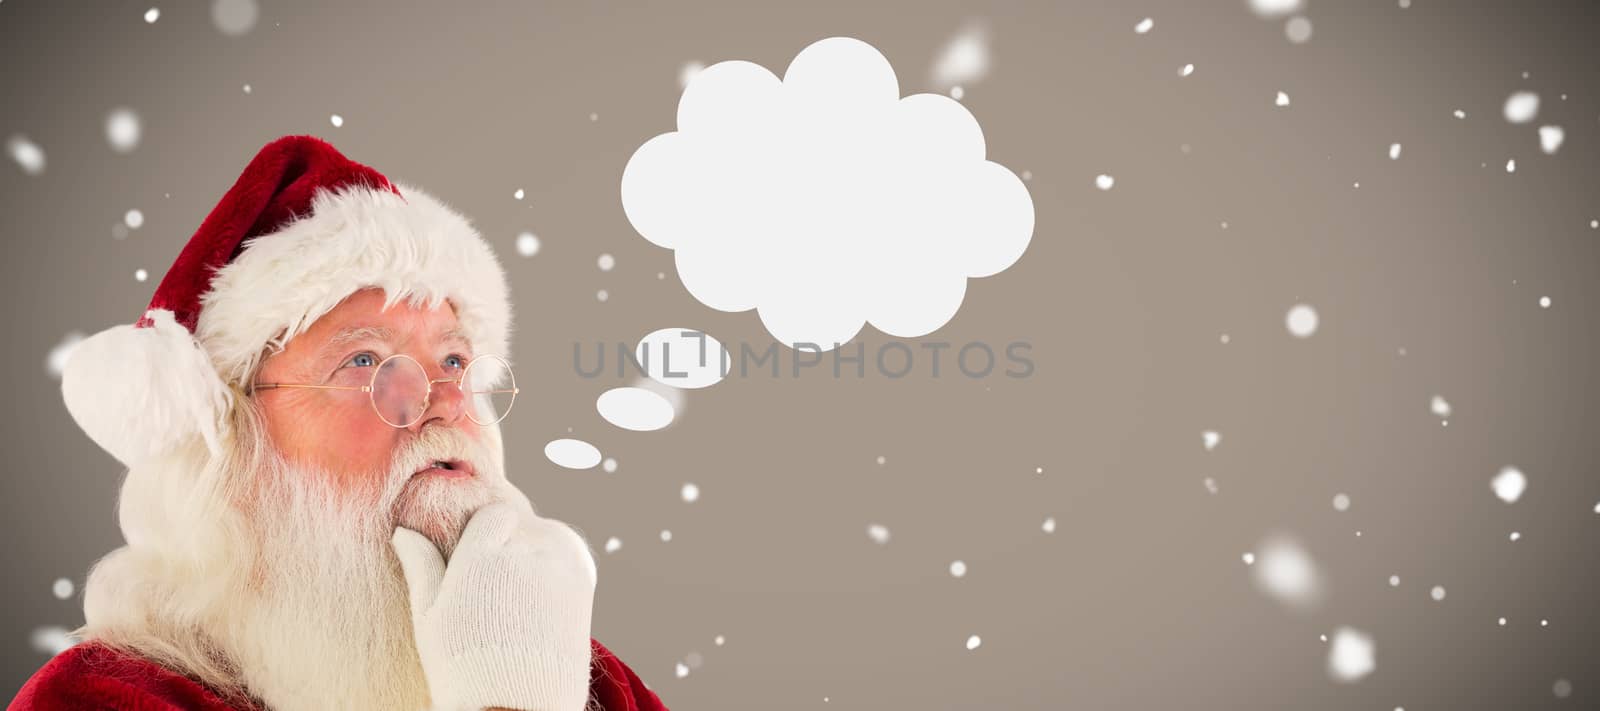 Santa is thinking about something against grey background with vignette